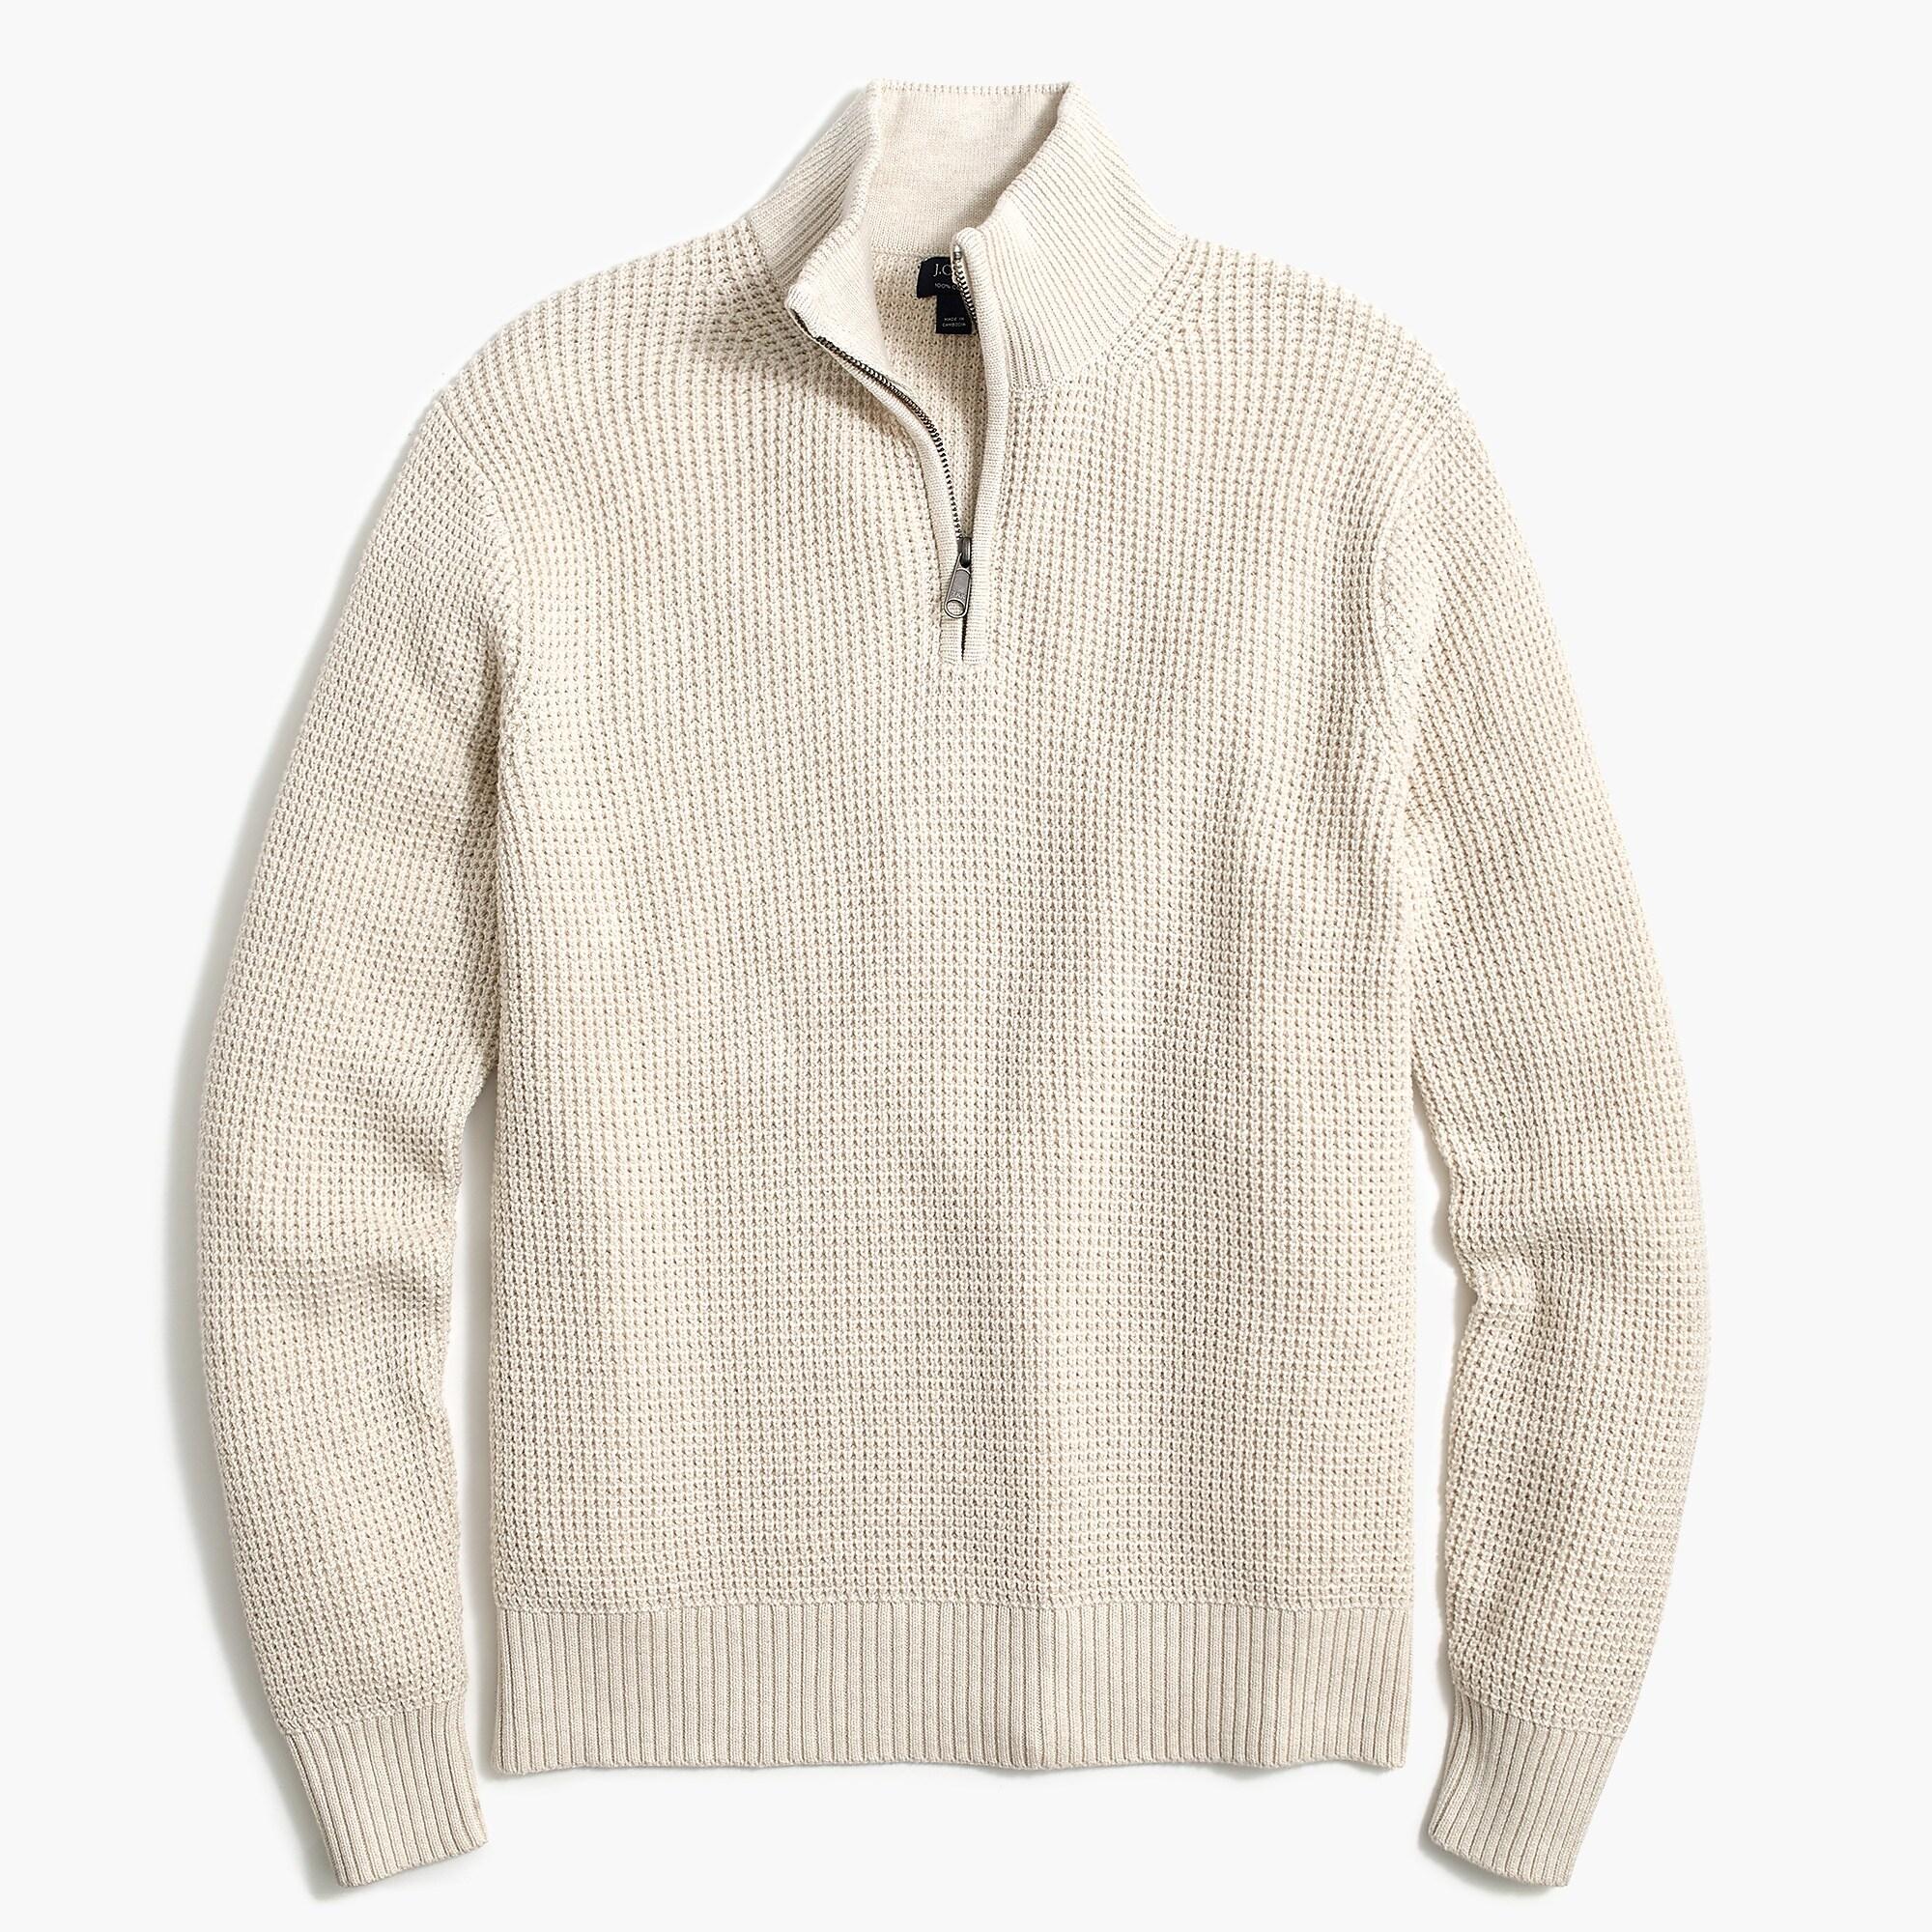 J.Crew Cotton Double-knit Half-zip Pullover in Natural for Men - Lyst